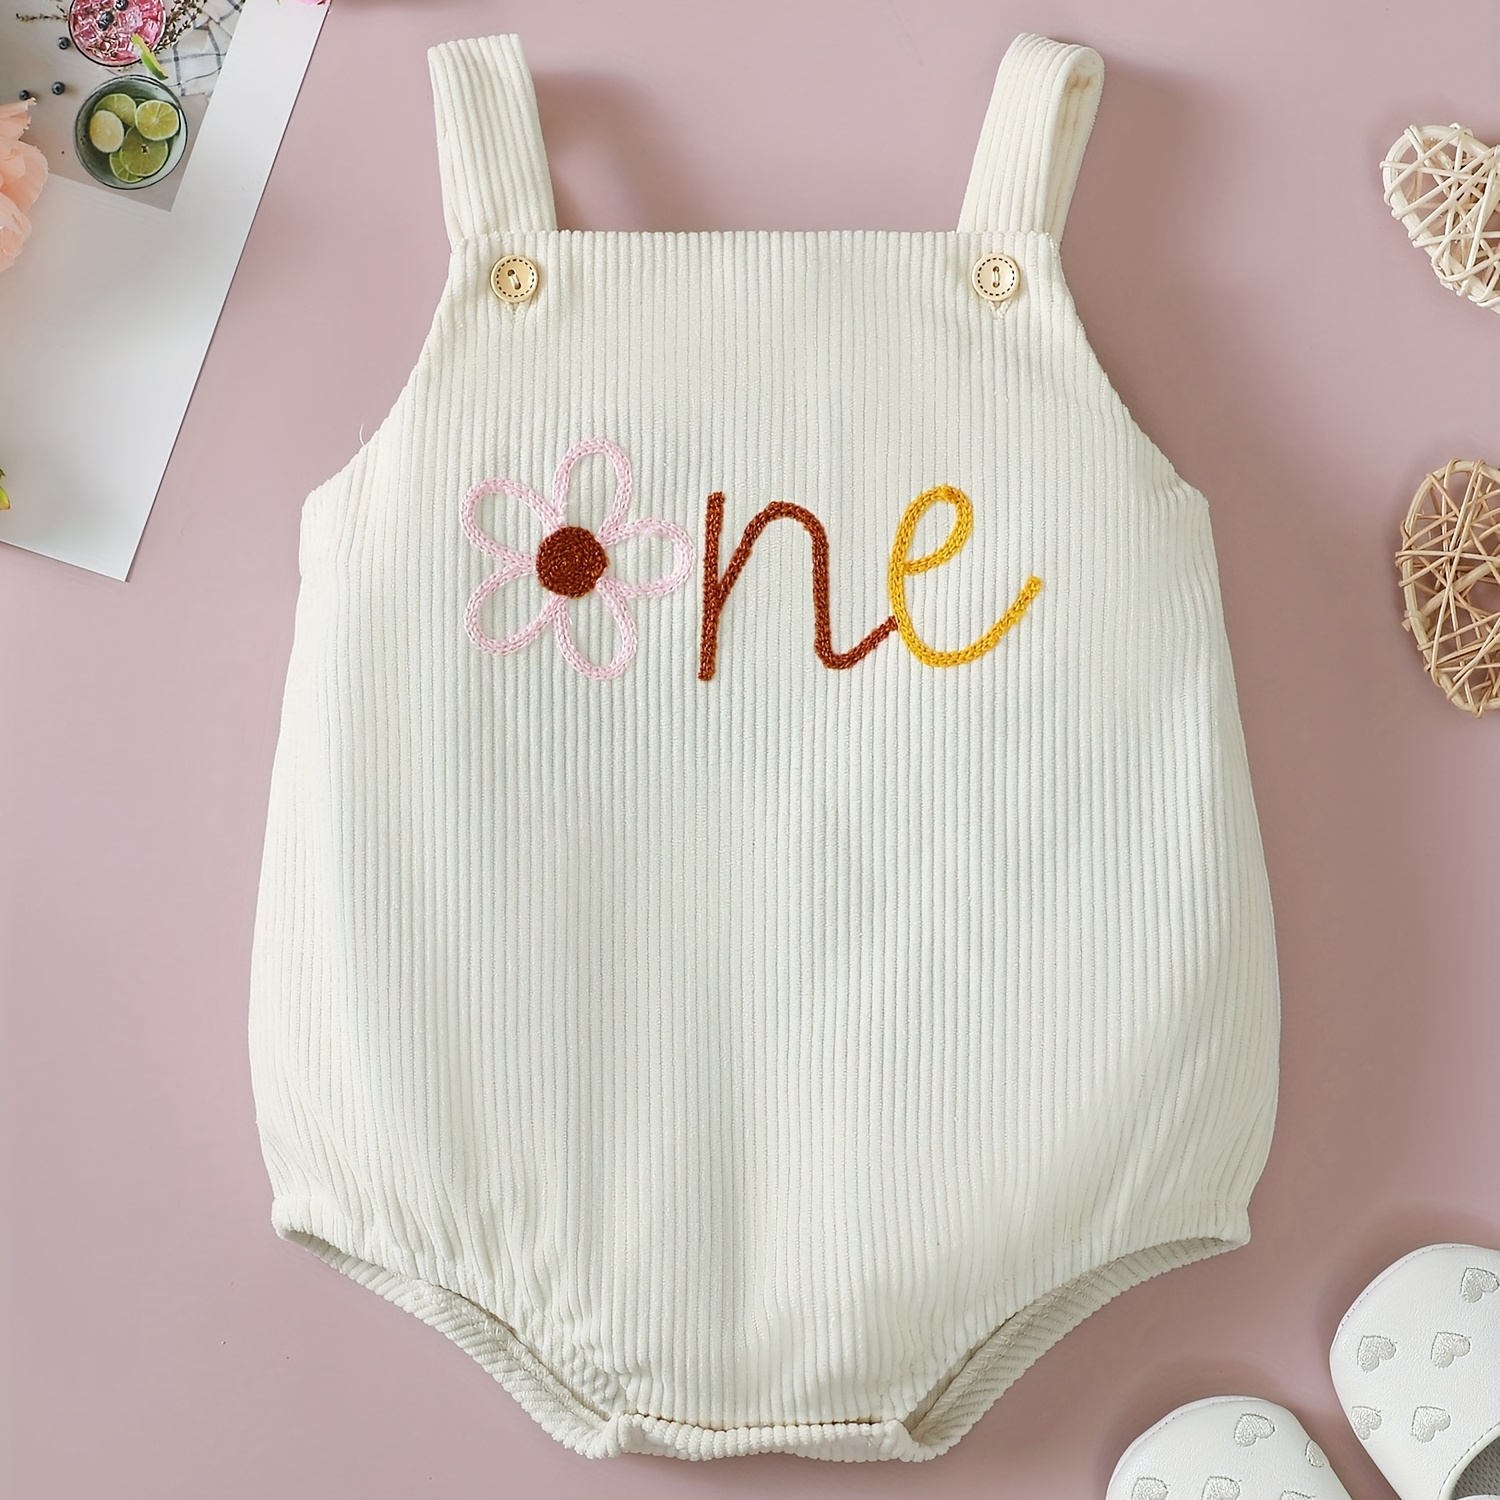 

Baby's "one" Flower Embroidered Corduroy Triangle Bodysuit, Casual Romper For First Birthday, Toddler & Infant Girl's Onesie For Summer, As Gift